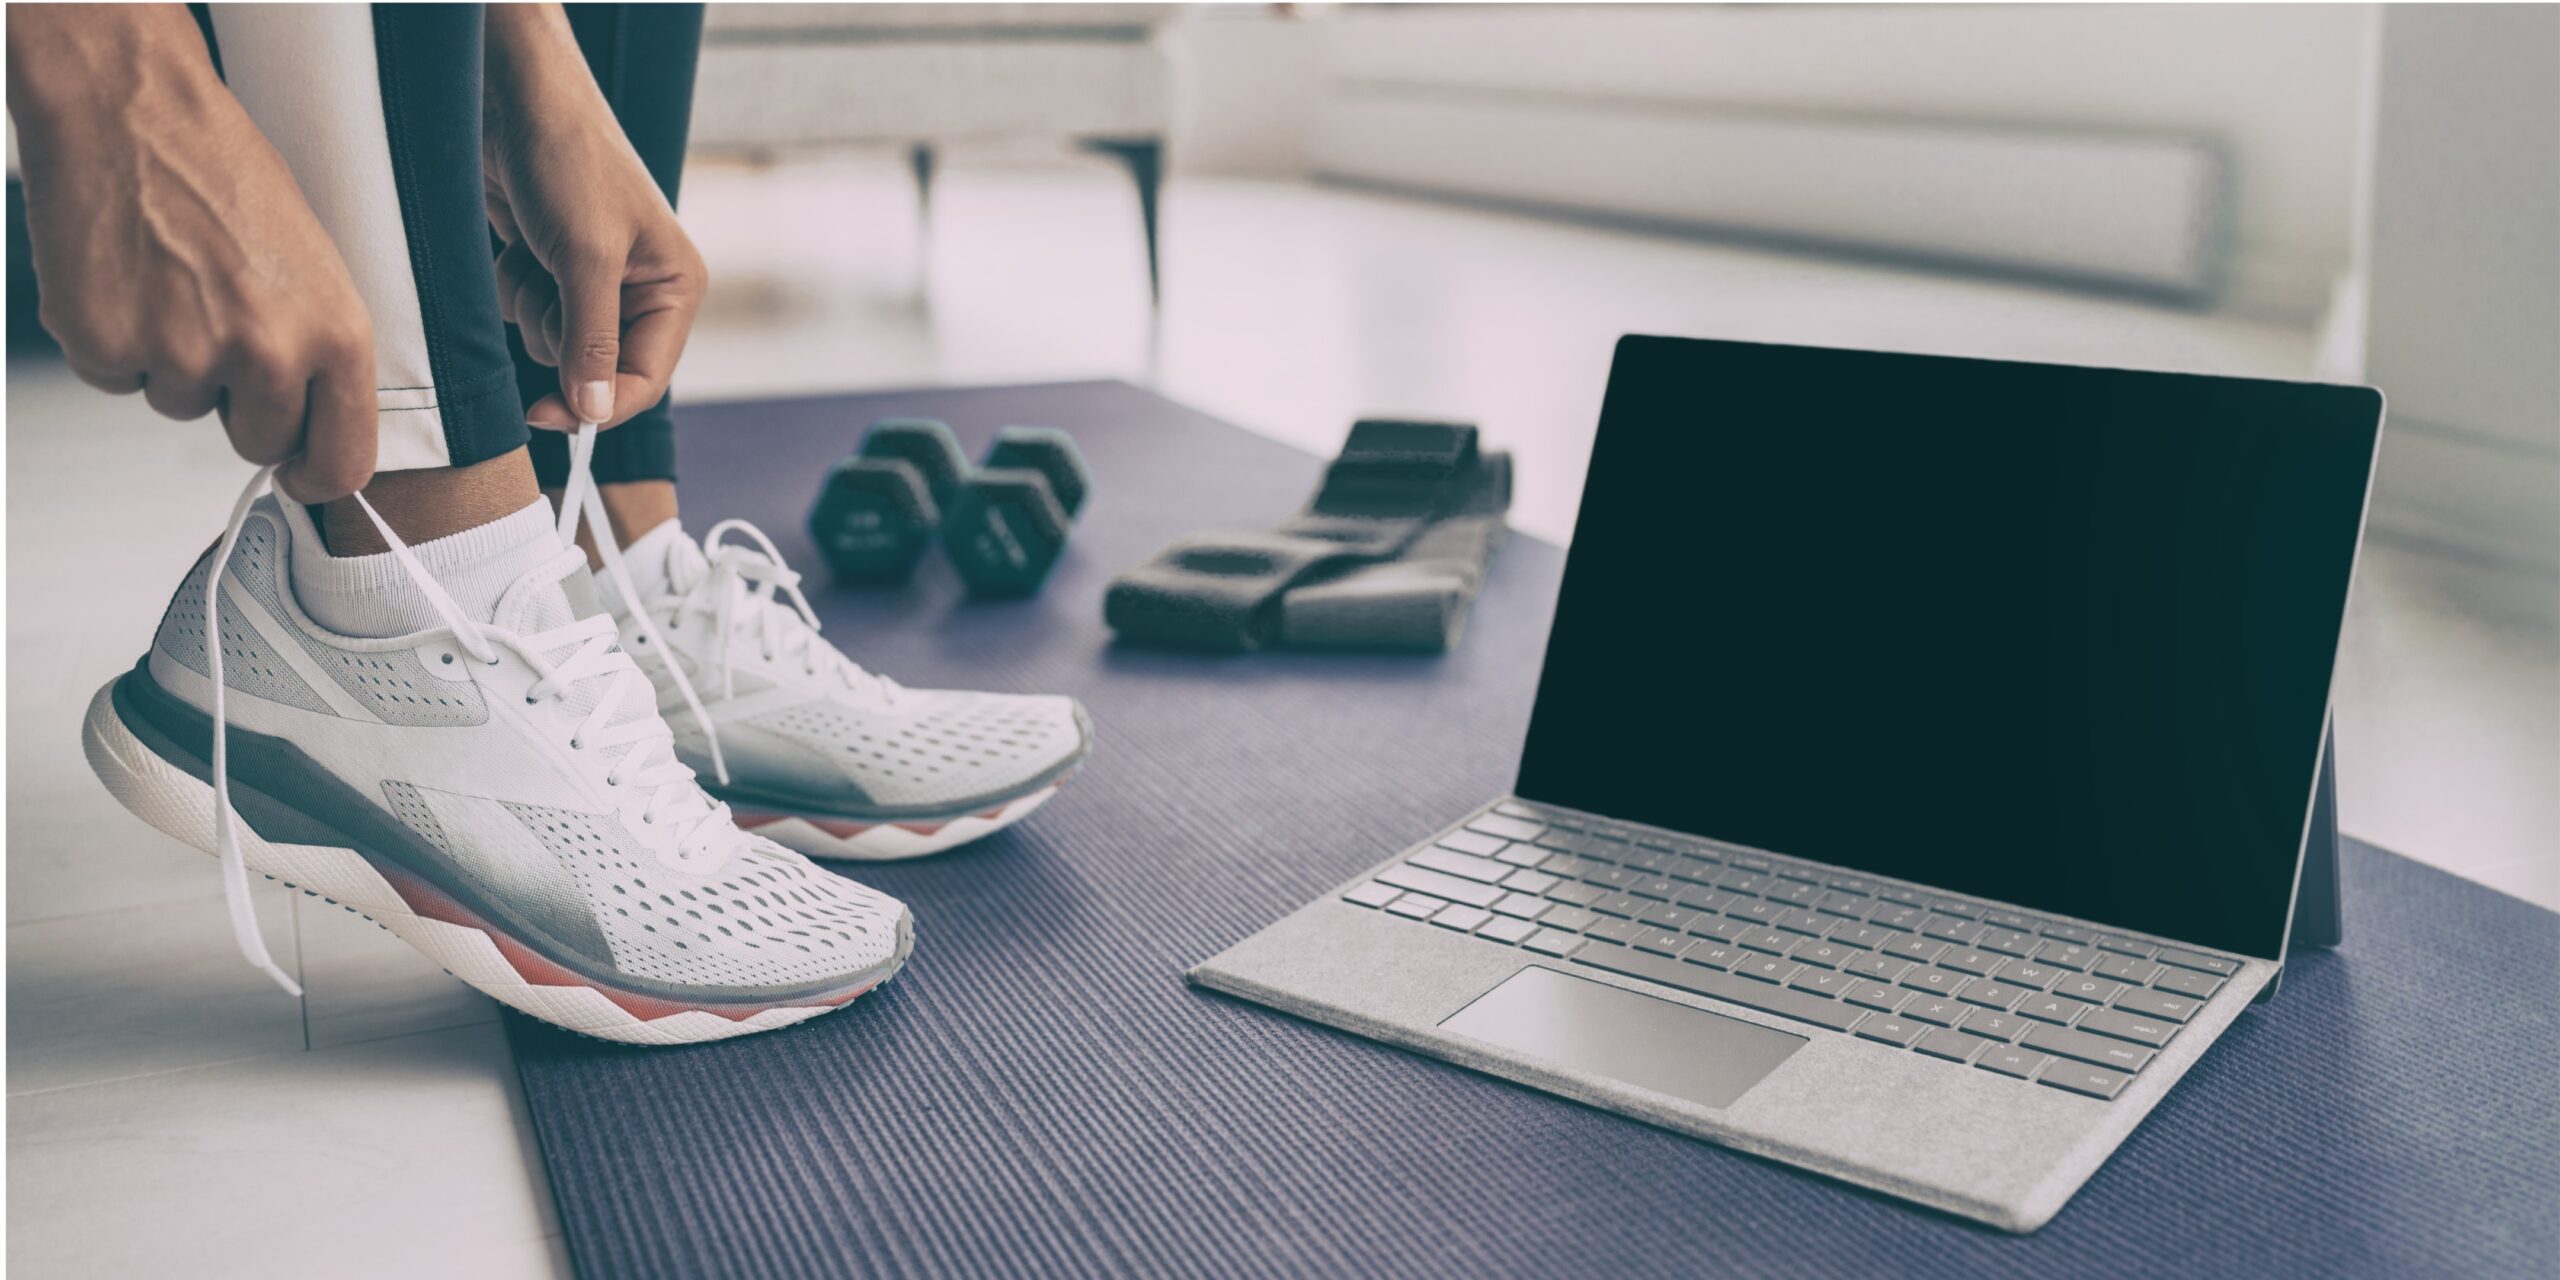 laptop on the floor and a pair of women's trainers with sports equipment in the background.